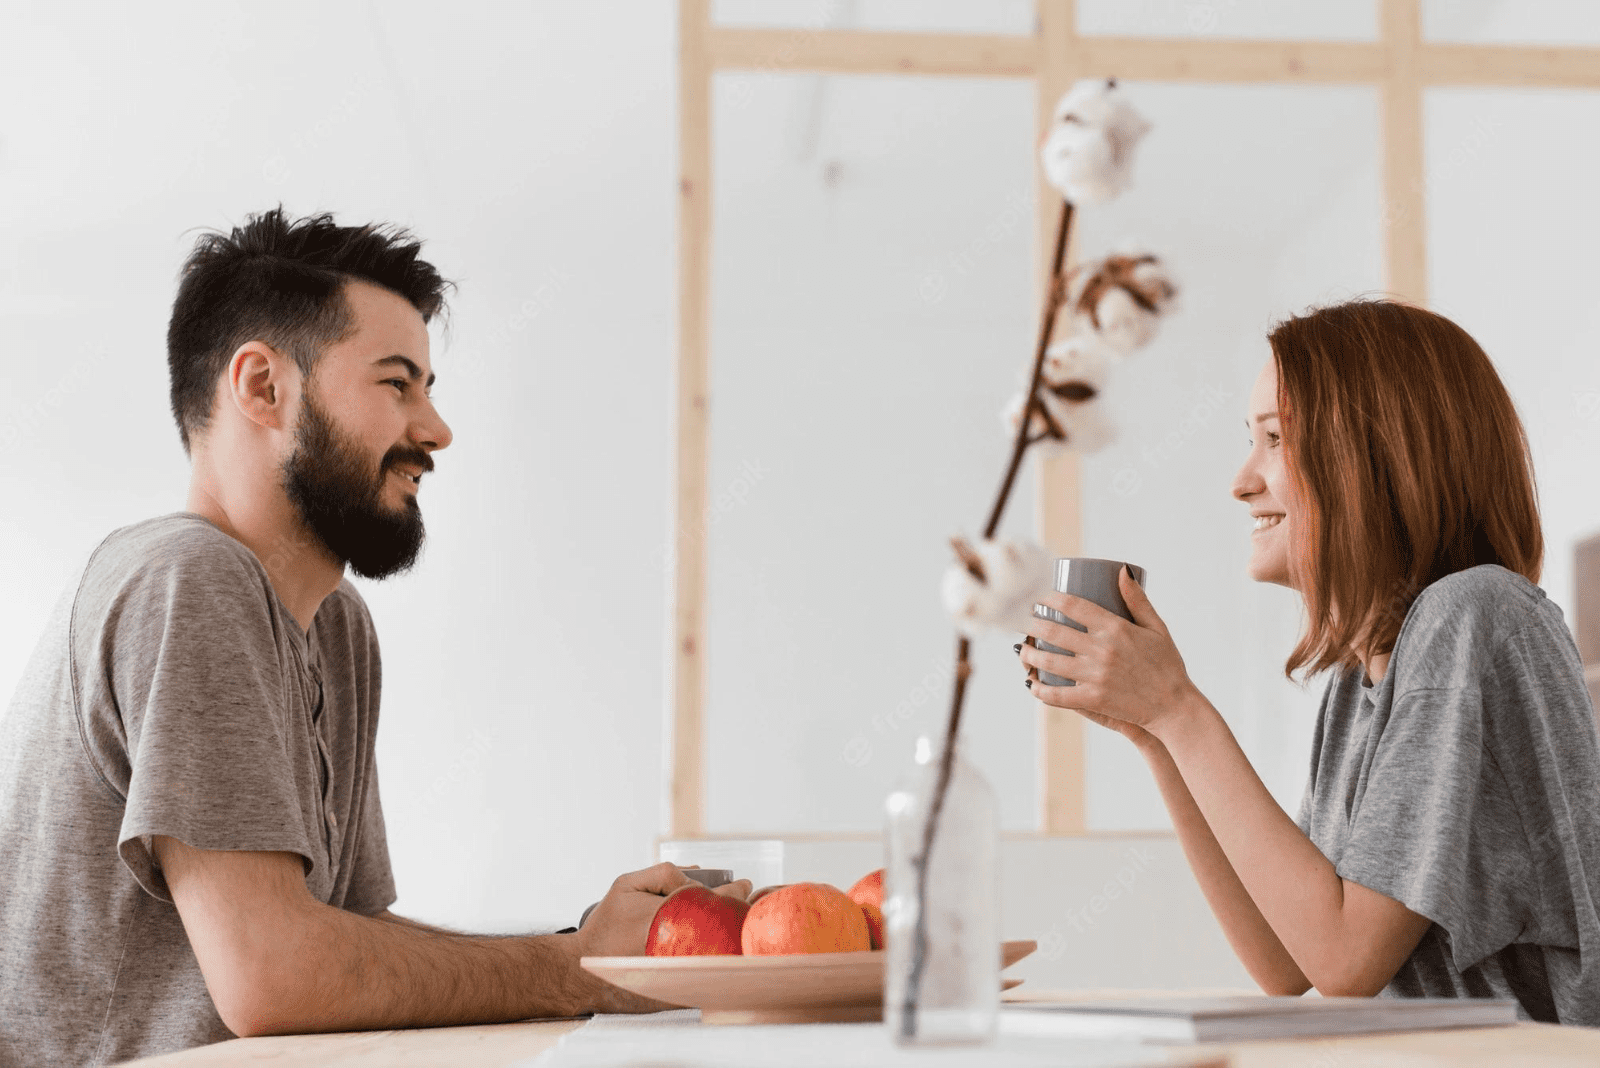 a smiling woman is sitting in the kitchen with a man and they are talking